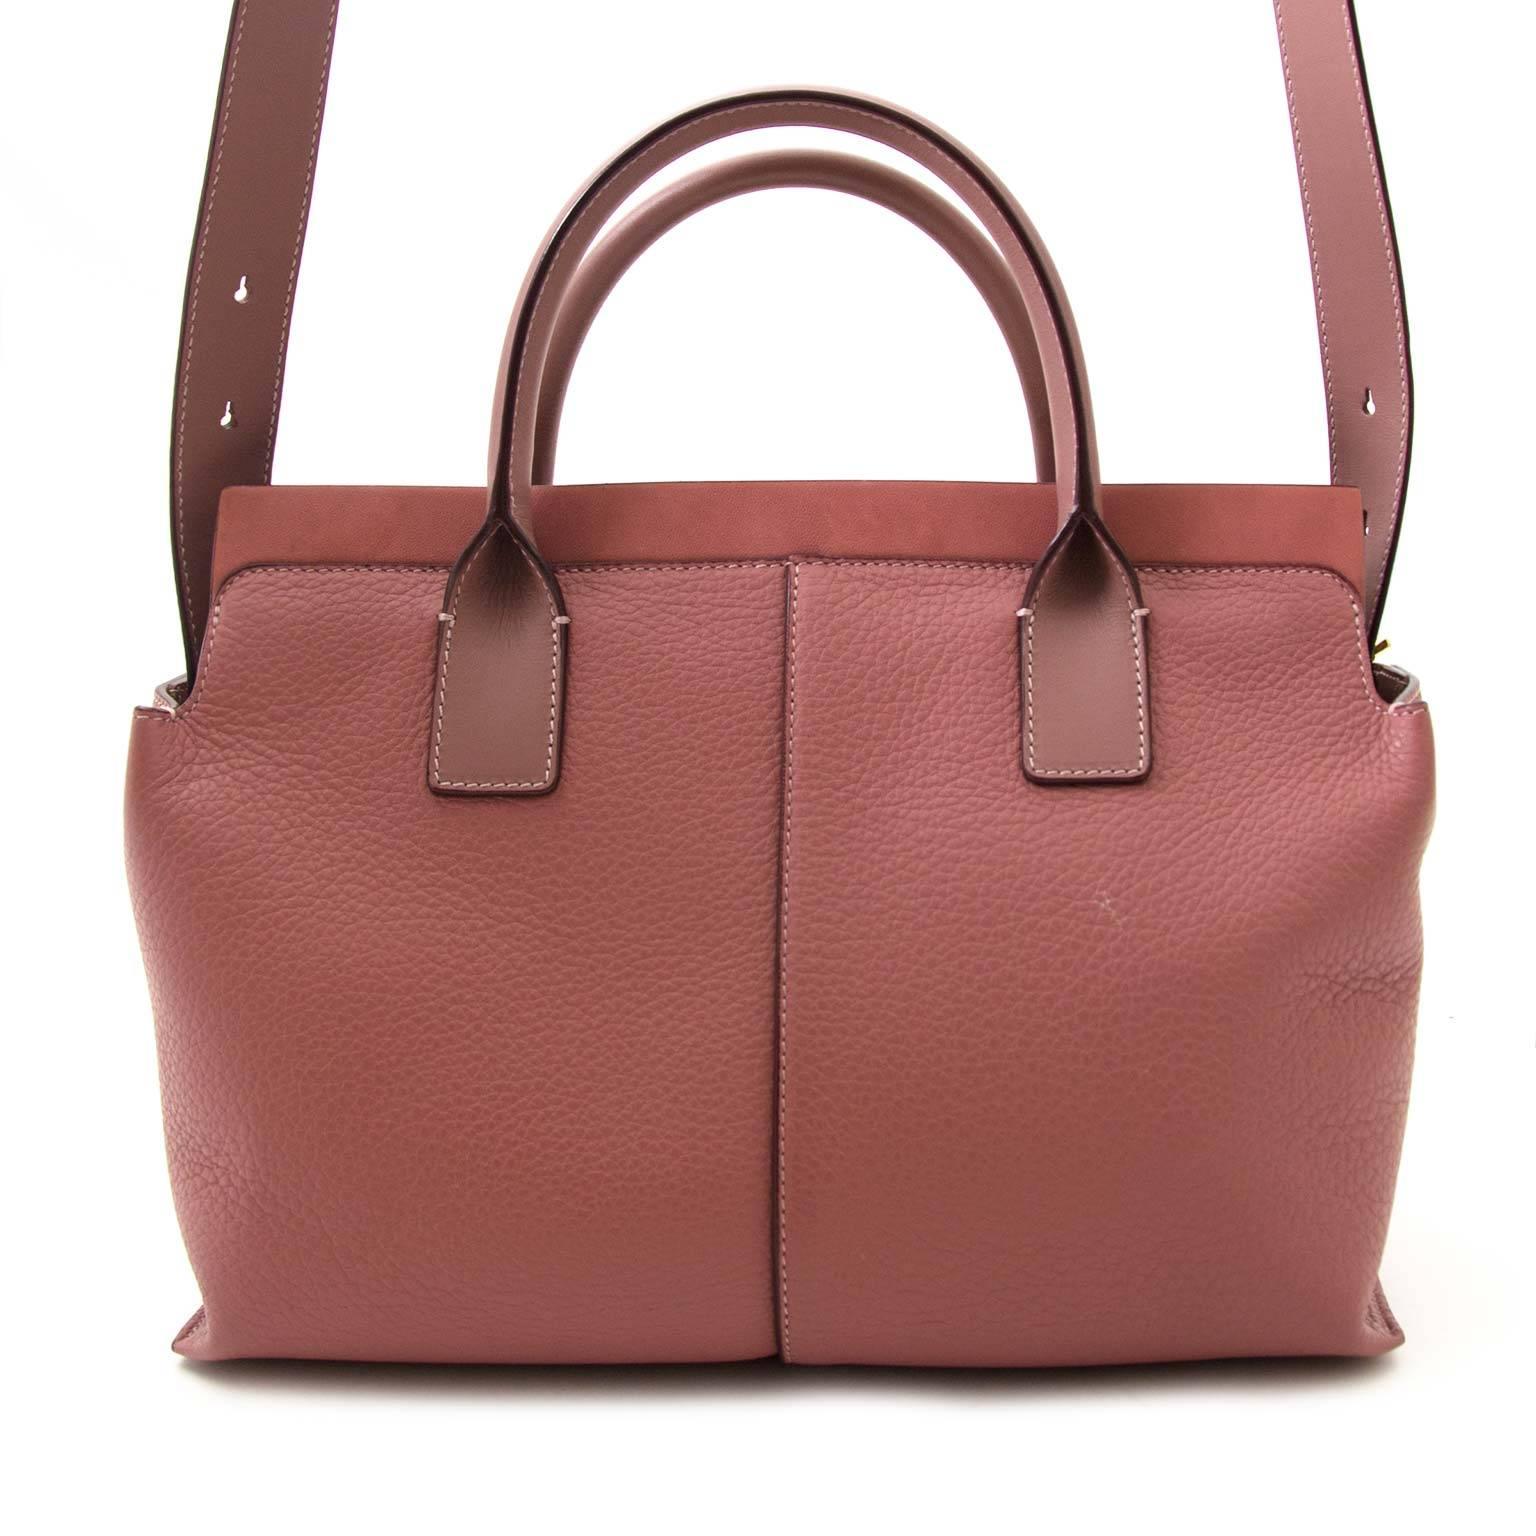 Very good preloved condition

Chloe Pink Leather Cate Zipper Satchel Bag

This Chic Satchel bag is crafted in a beautifull soft pink leather.
This beauty features two front zip pockets that are connected by a gold chain.
The tote bag has a golden